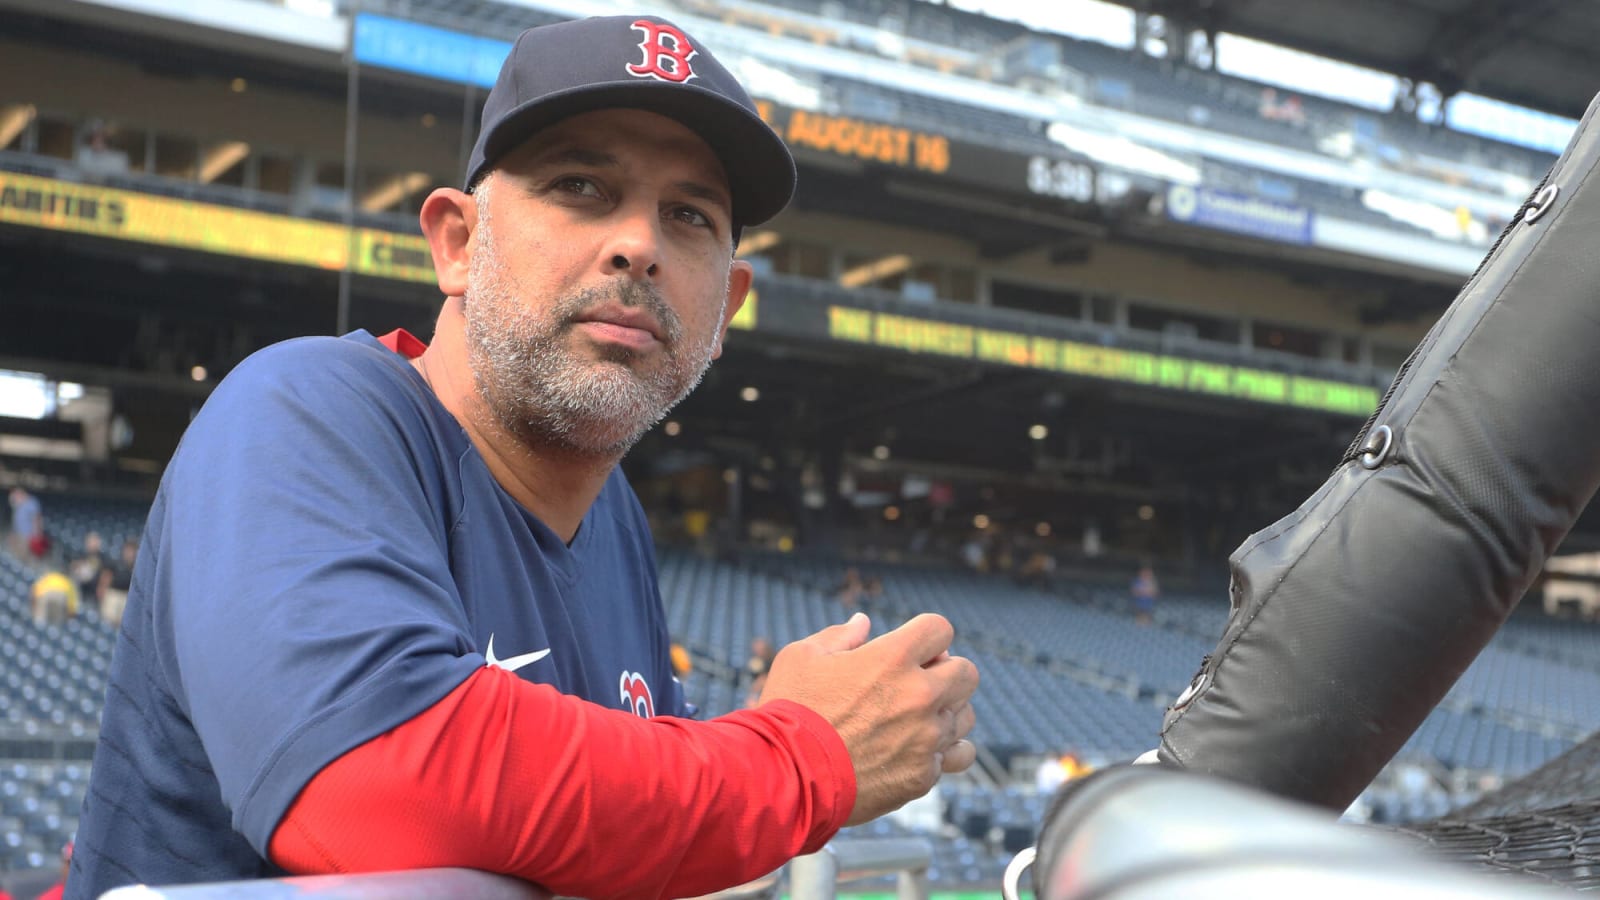 Red Sox team president: 'Very comfortable' that Alex Cora will remain manager